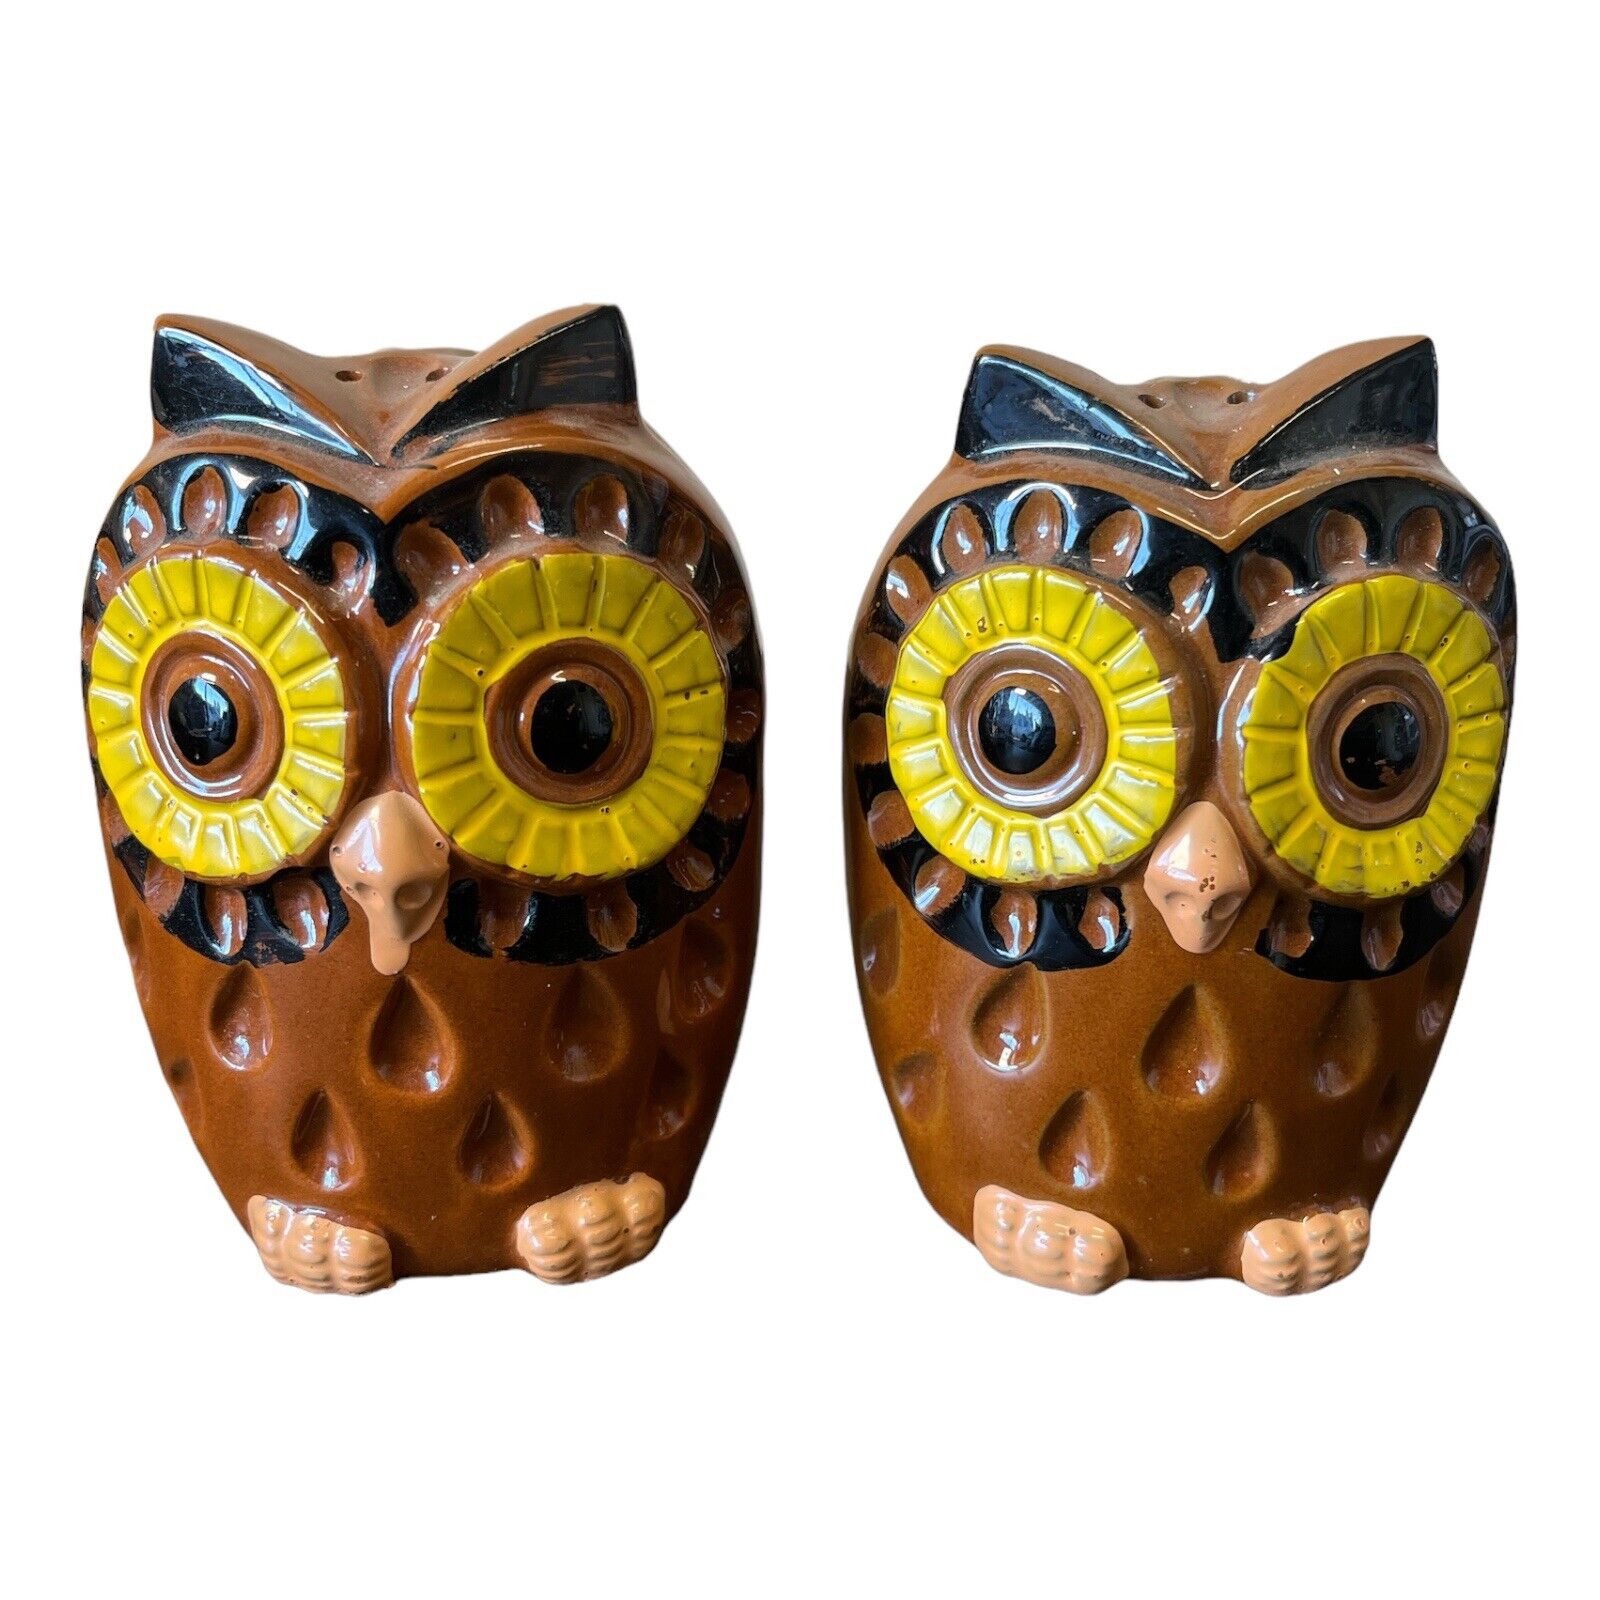 Vintage Large Owl Hand Painted Made in Japan Salt and Pepper Shakers